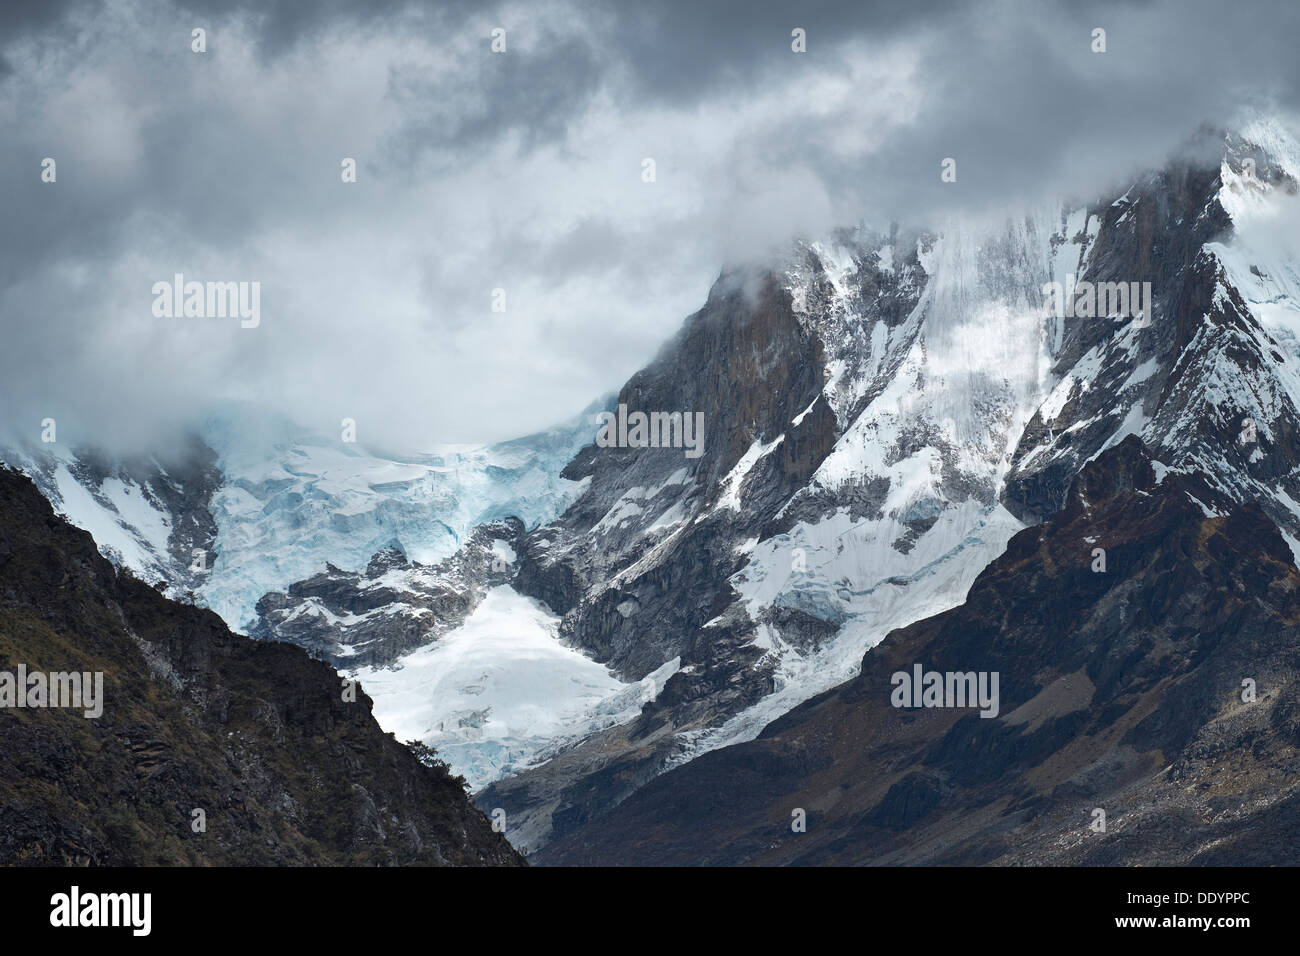 Storm Clouds over the summit of Huascaran in the Huascarán National Park, Peruvian Andes. Stock Photo